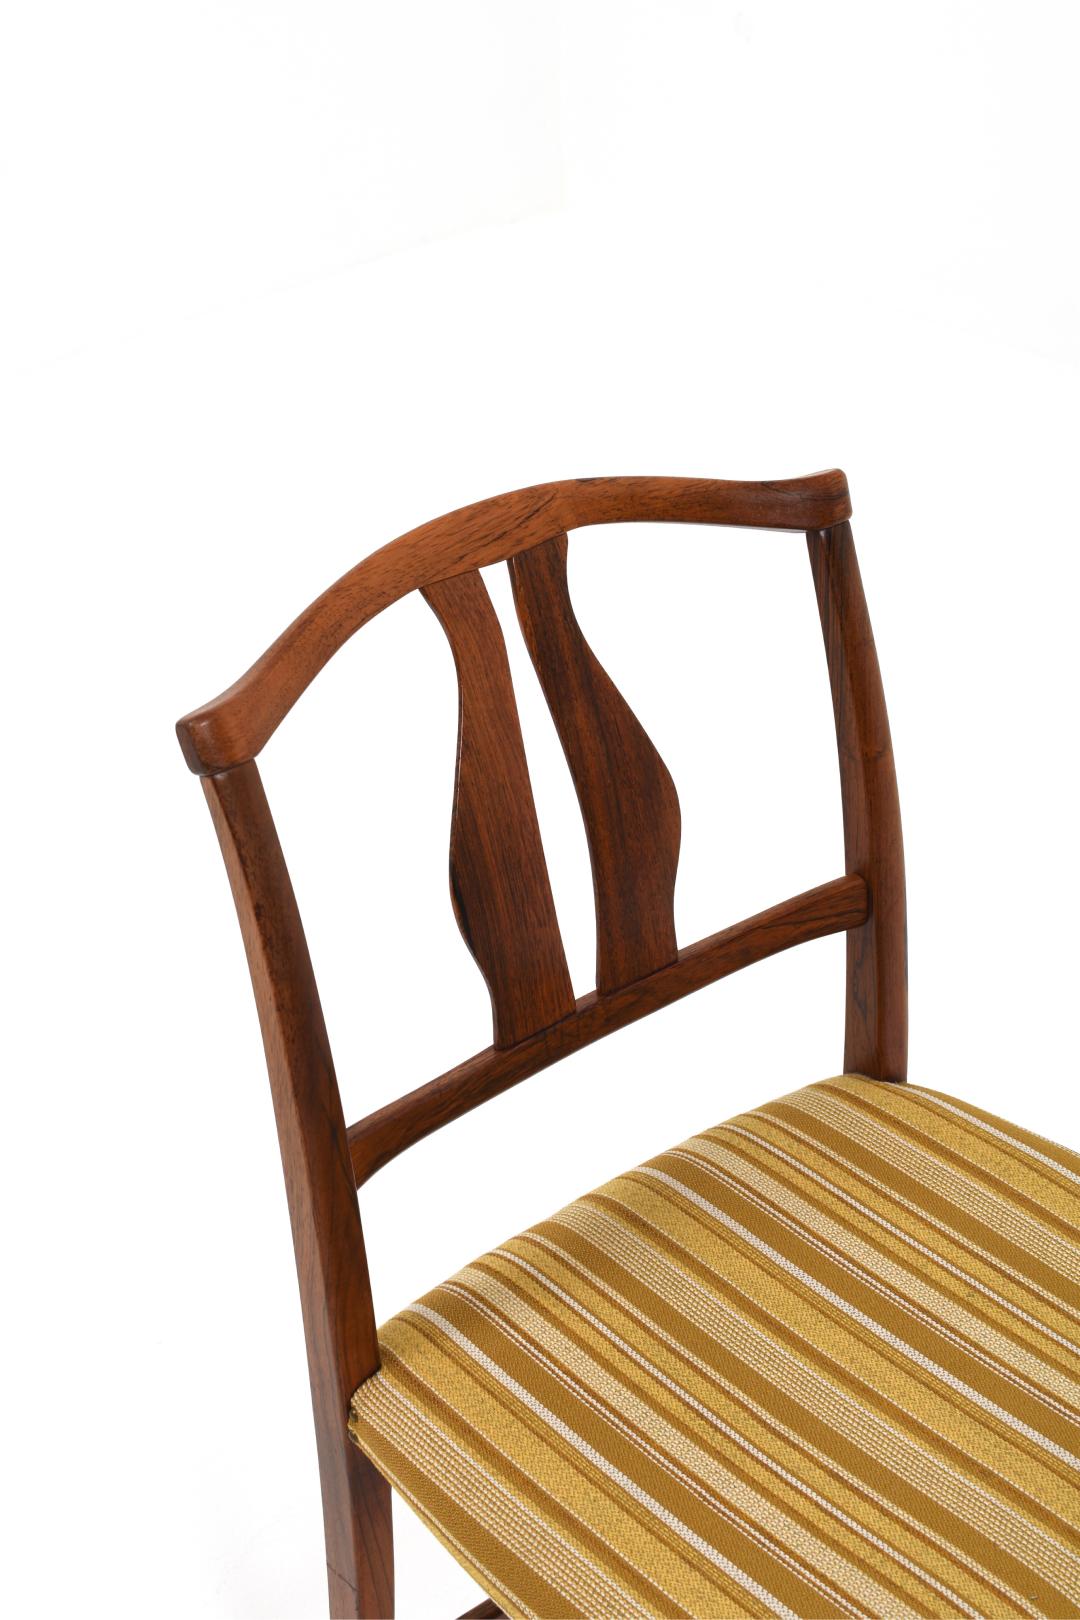 Mid-20th Century Vidar Dining Chairs by Carl Malmsten, set of 6 For Sale